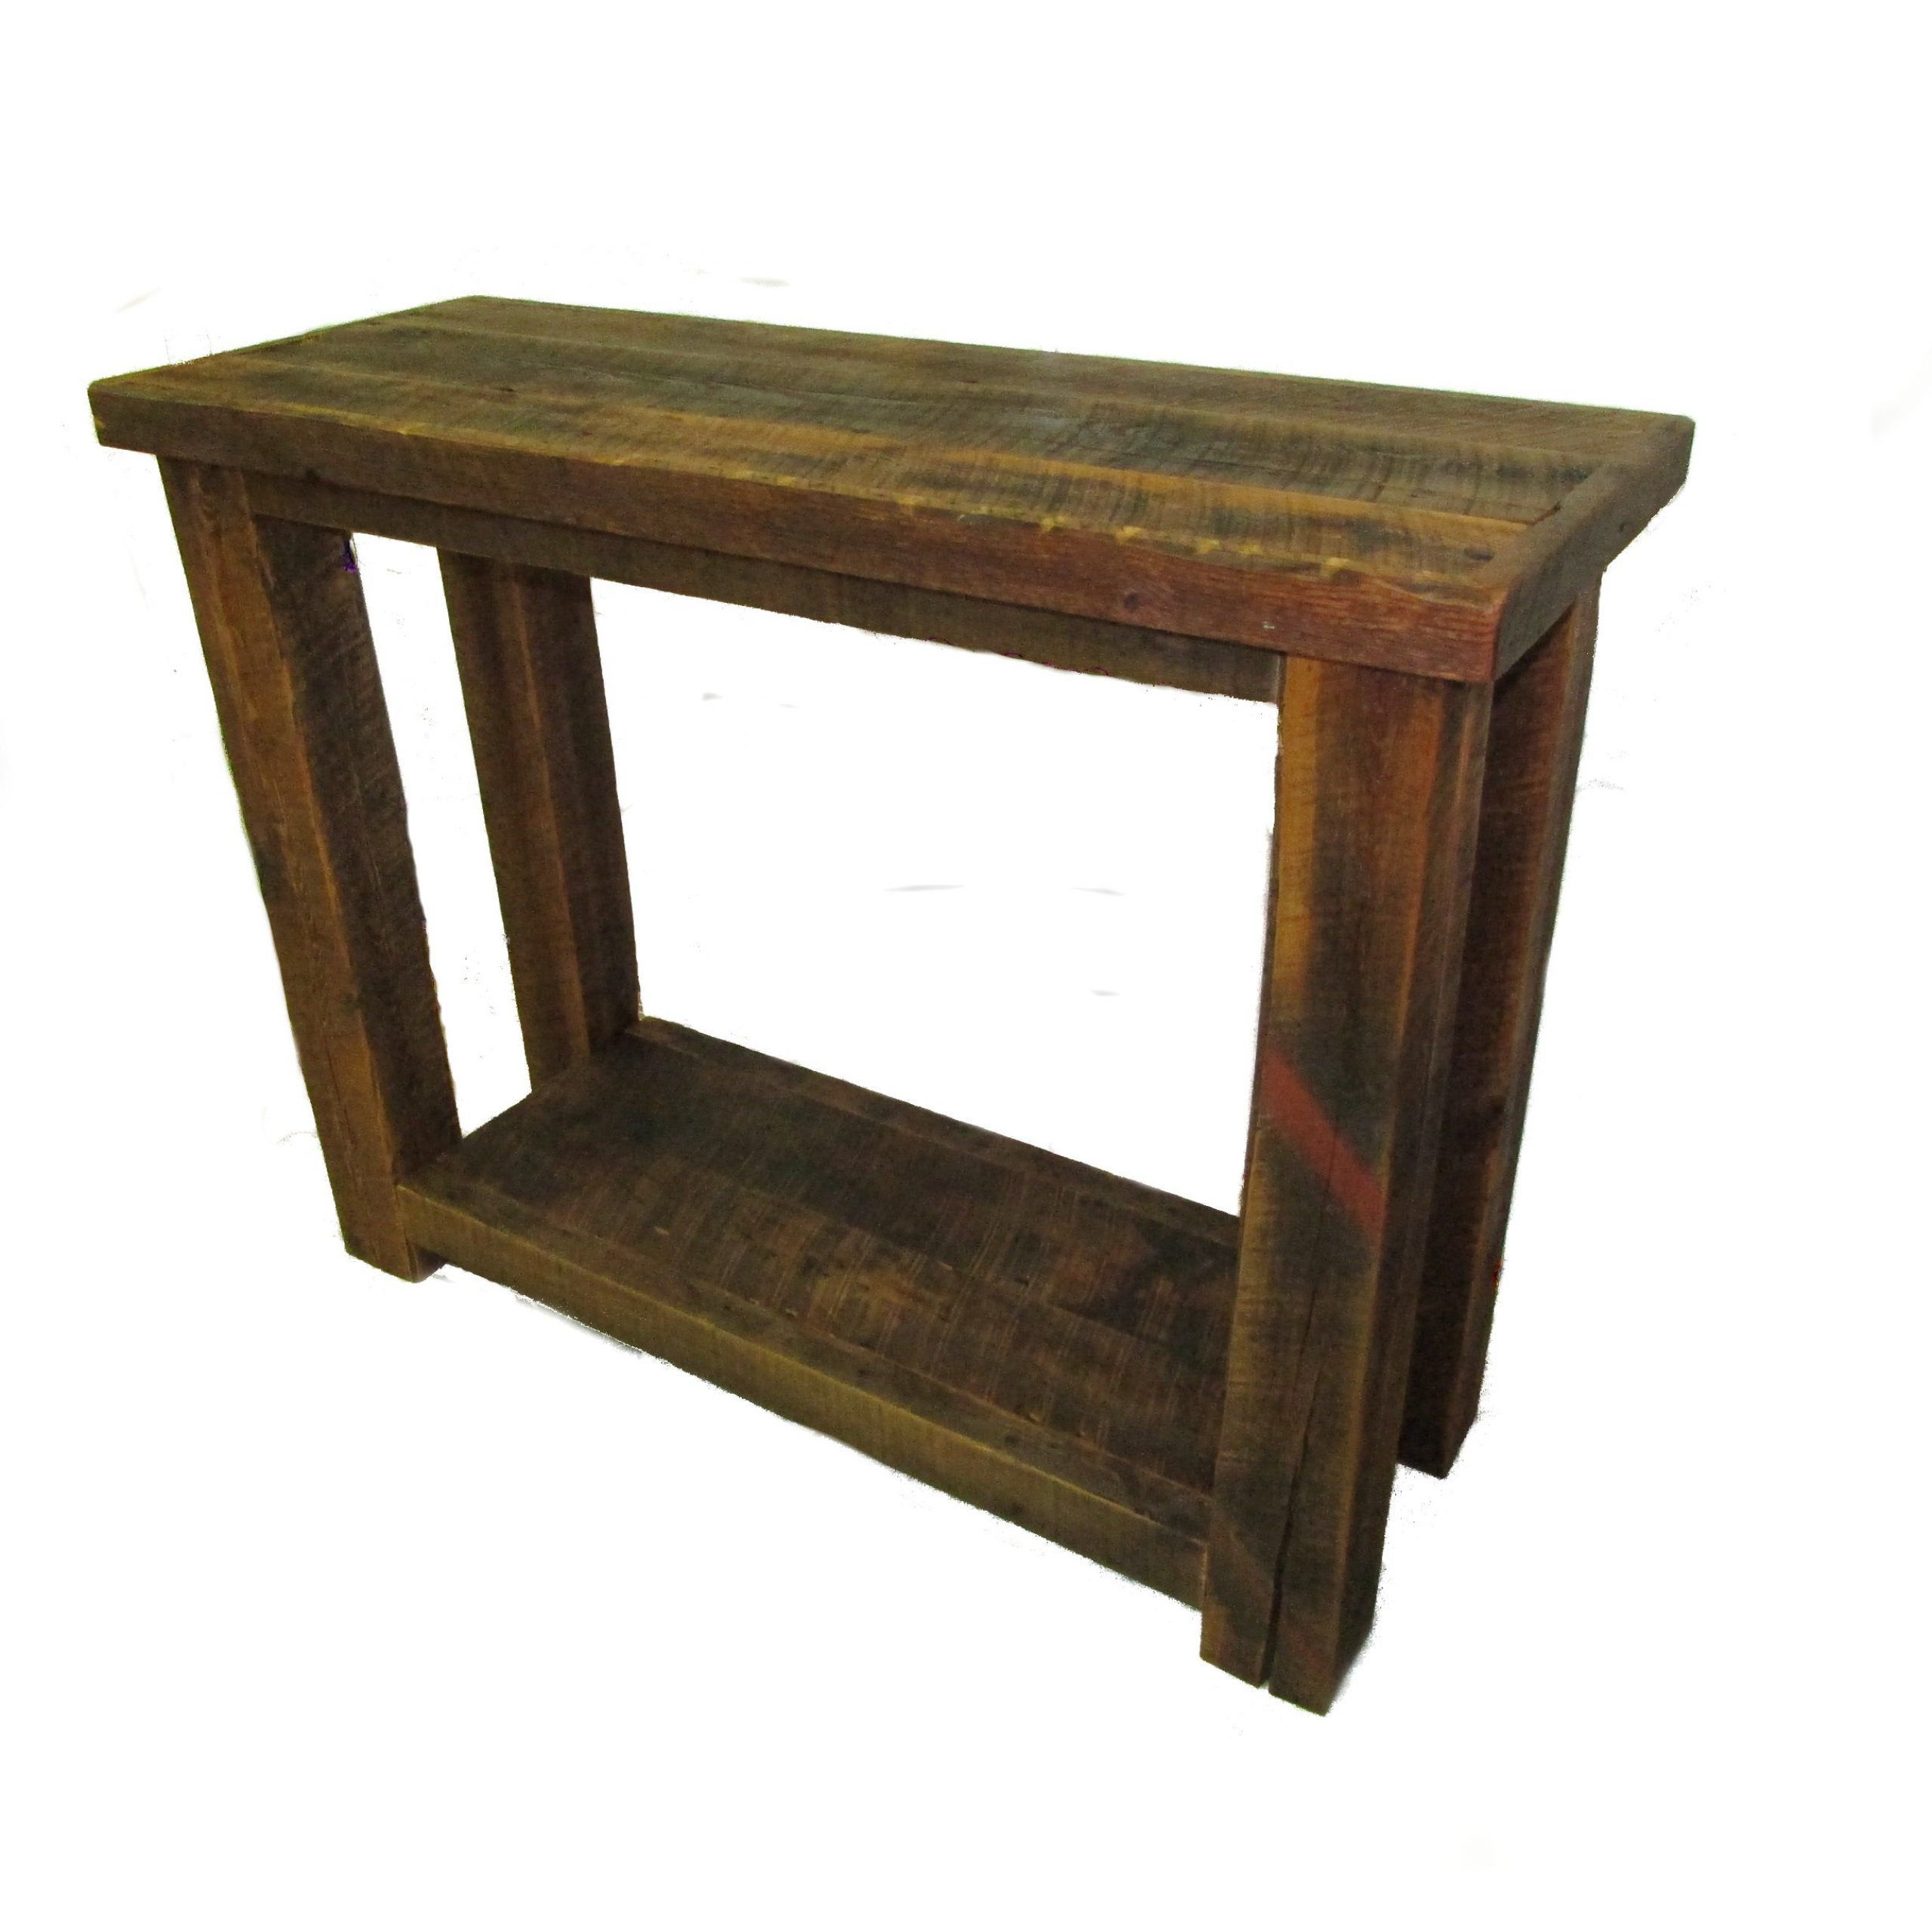 Reclaimed Barn Wood Sofa Table | White Cedar | Barnwood Within Barnwood Console Tables (View 18 of 20)